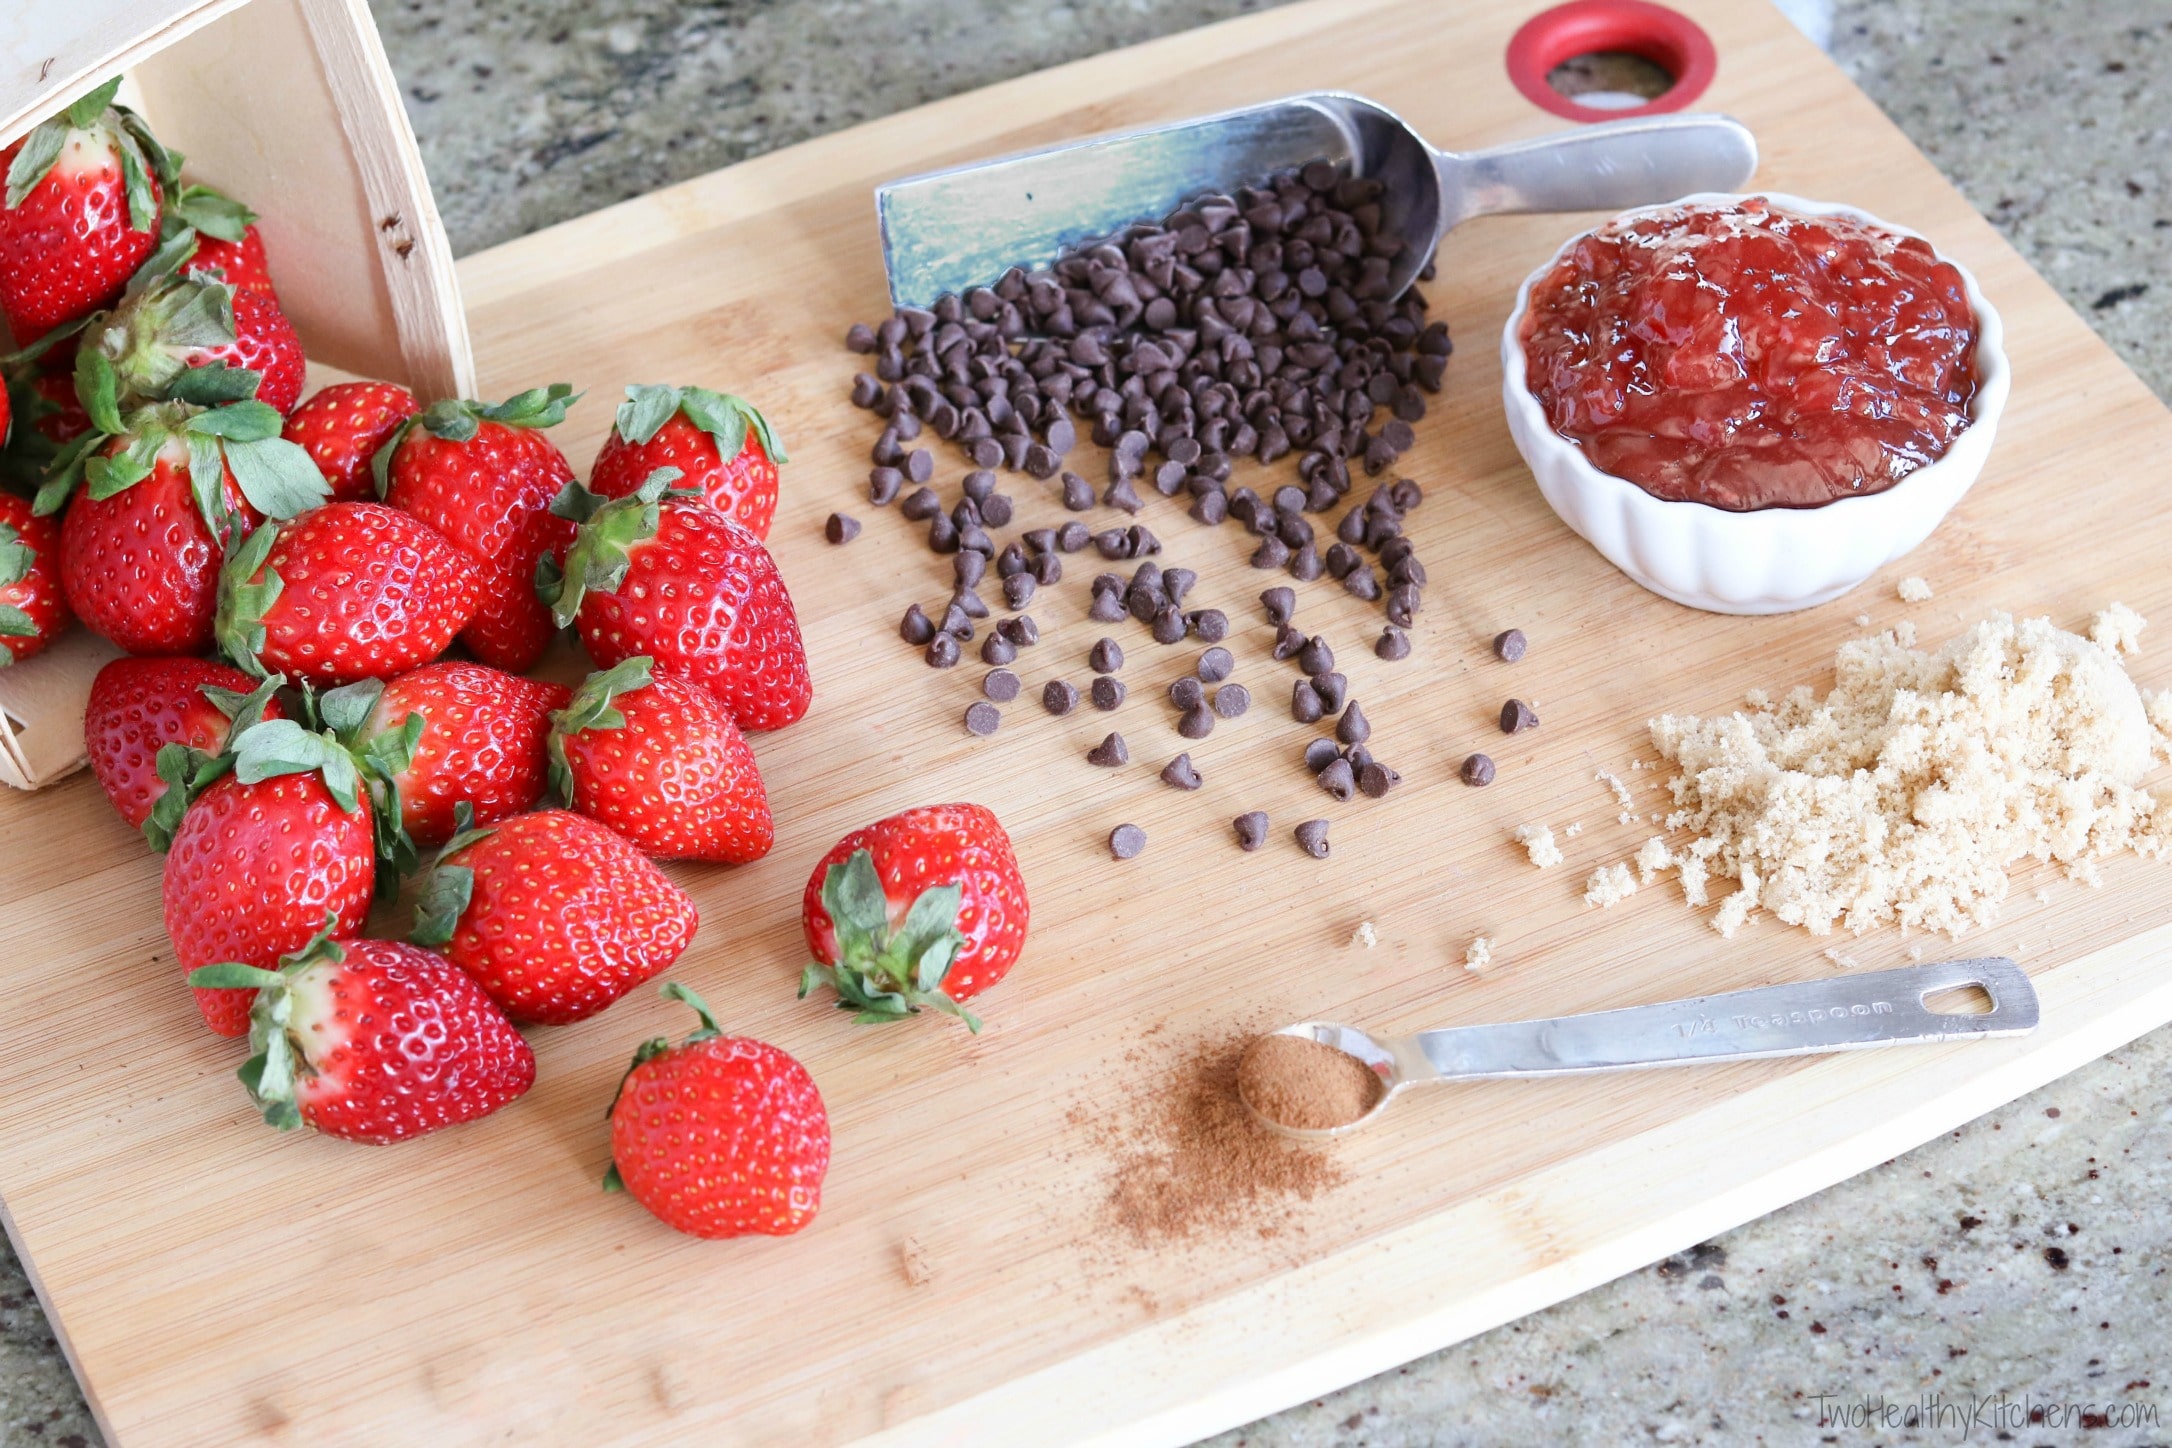 Chocolate chips spilling out of scoop, fresh strawberries cascading out of basket, bowl of strawberry jelly, measuring spoon of cinnamon, and small pile of brown sugar on bamboo cutting board.